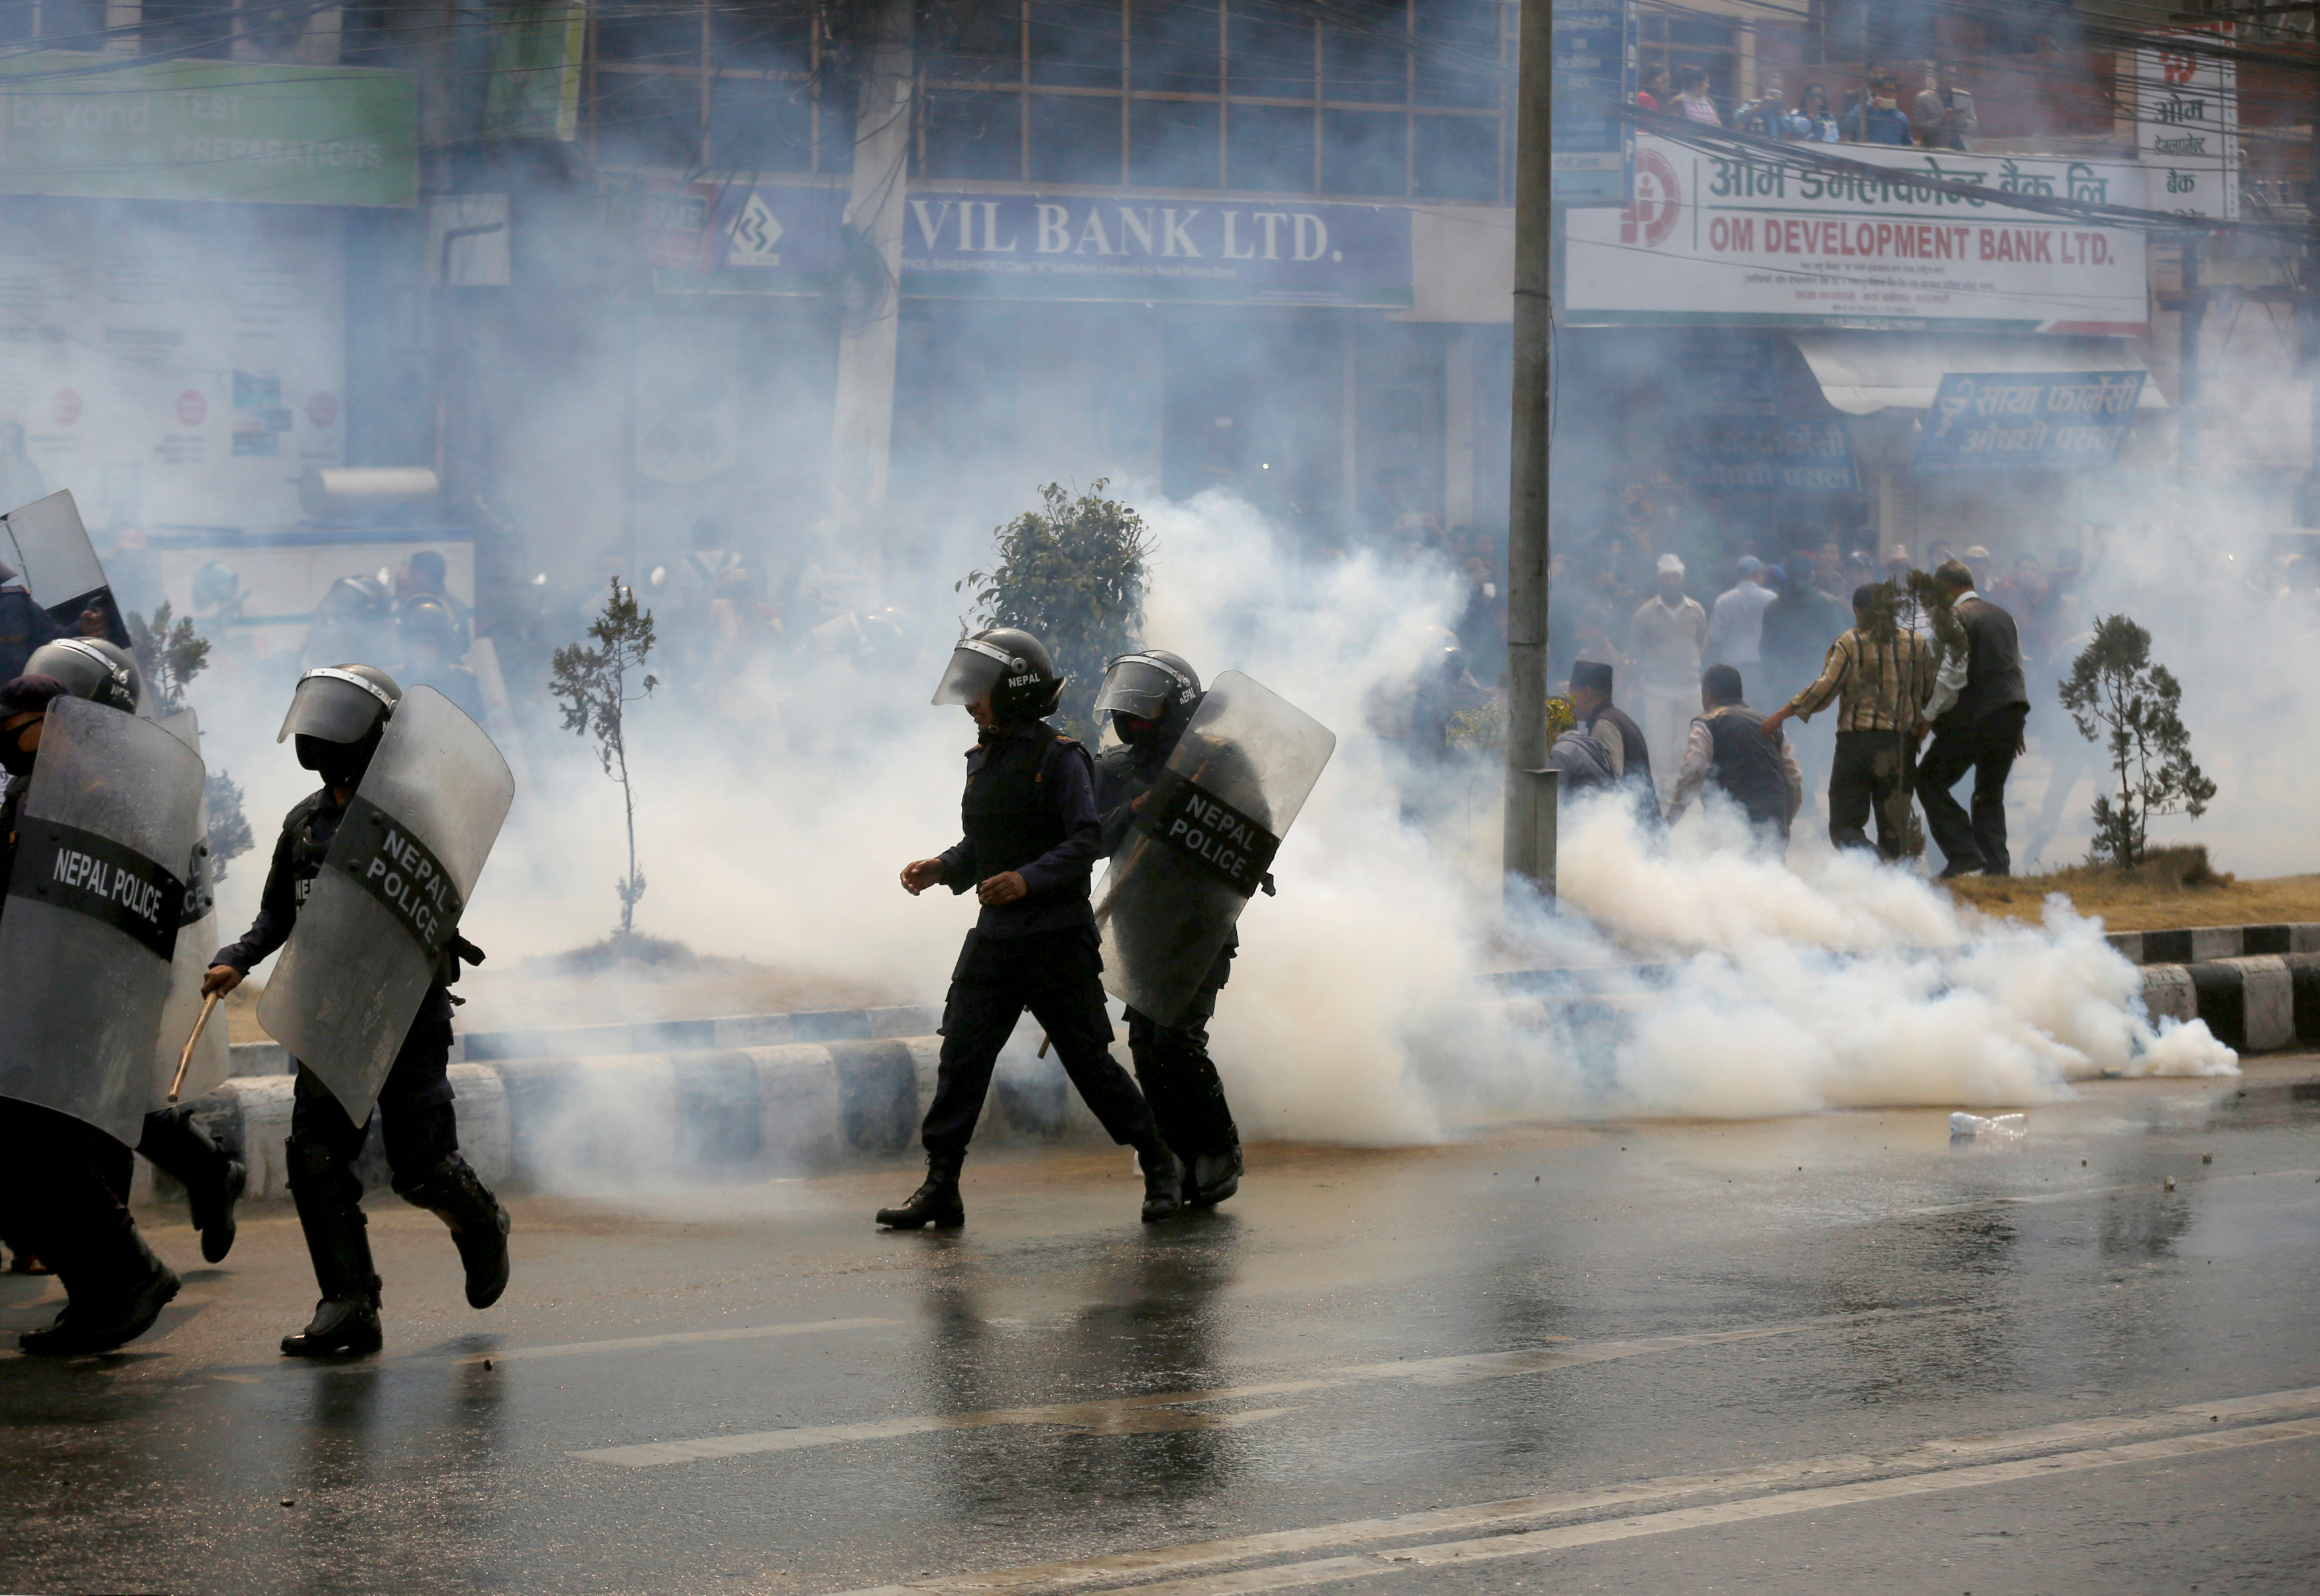 Smoke rise from a teargas shell fired by the police to disperse the crowd during the protest against the road expansion projects causing people in the affected areas to lose their houses and lands in Kathmandu, Nepal March 28, 2018. Photo: REUTERS